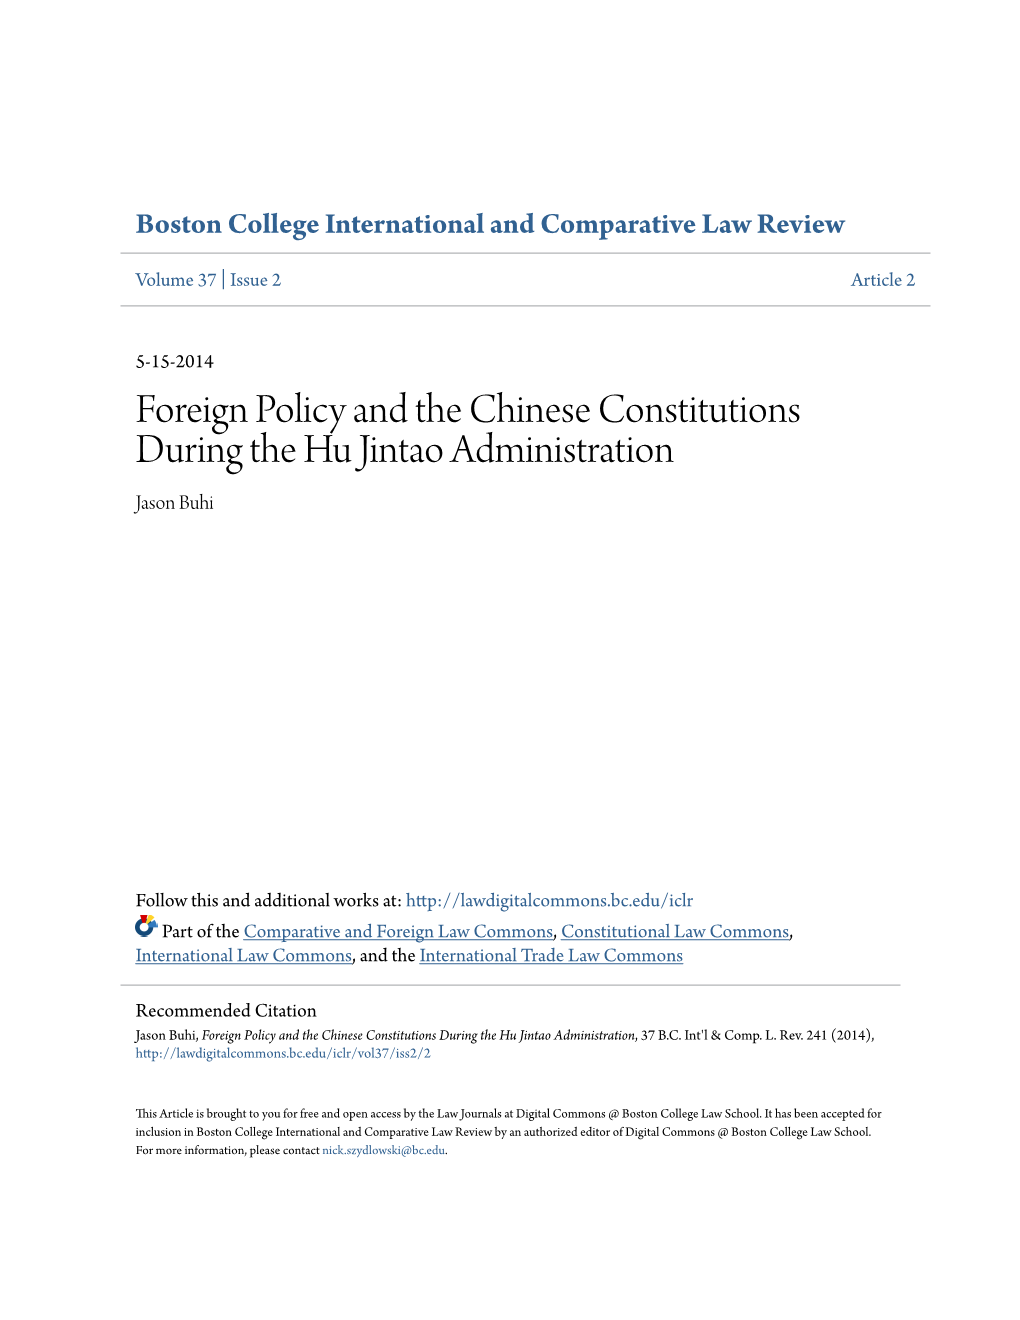 Foreign Policy and the Chinese Constitutions During the Hu Jintao Administration Jason Buhi